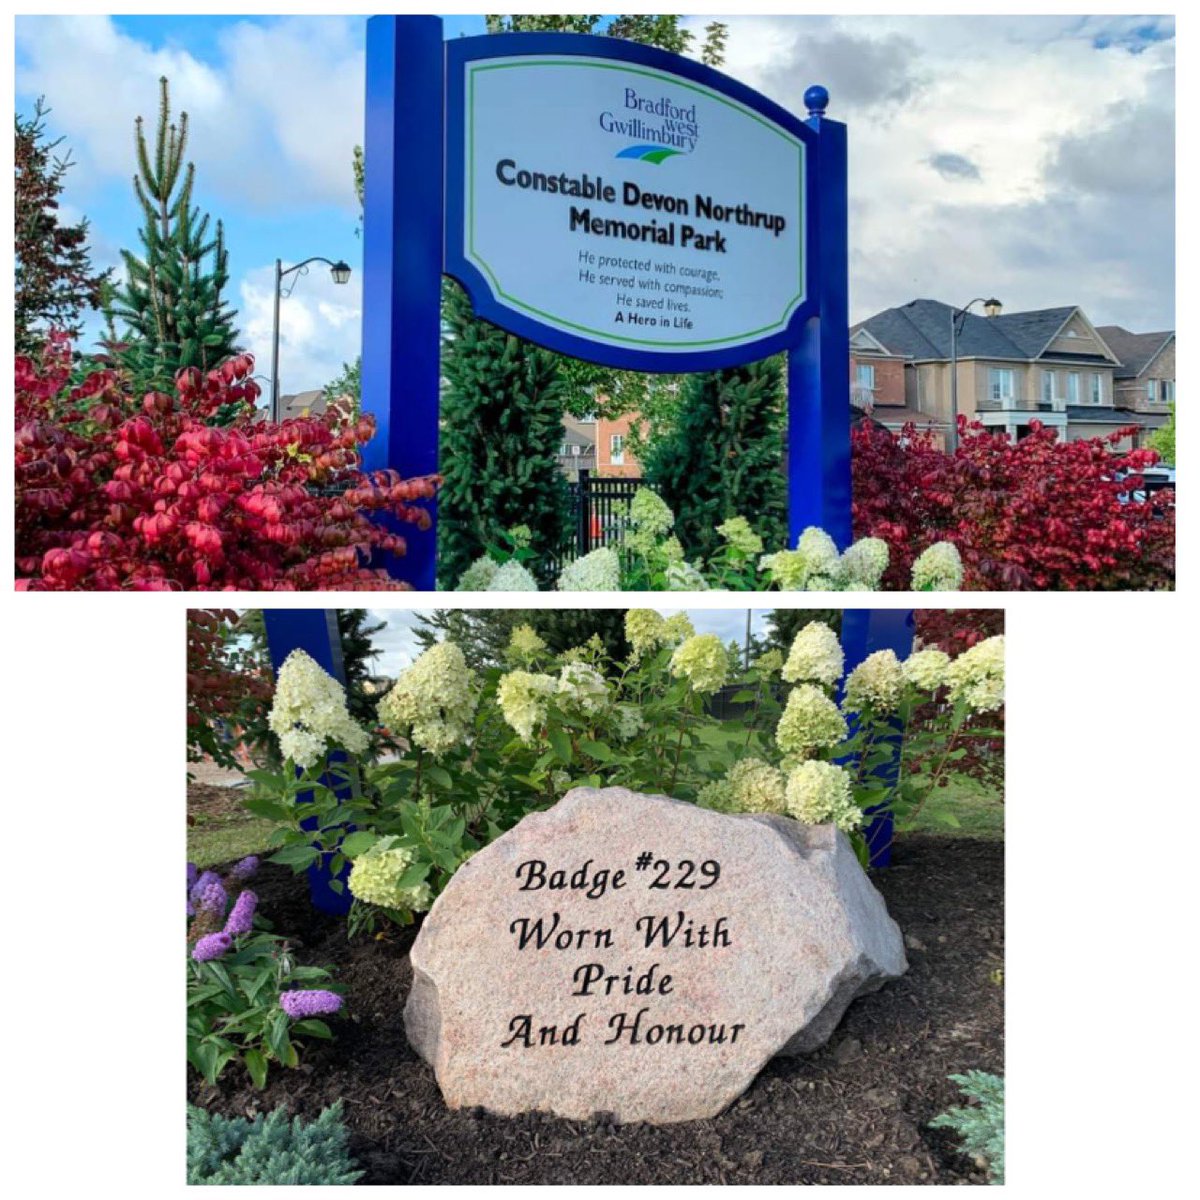 Thank you to the Town of Bradford West Gwillimbury for honouring PC Devon Northrup #229 by naming a park in his honour. The Constable Devon Northrup Memorial Park. @PoliceAssocON @TownofBWG